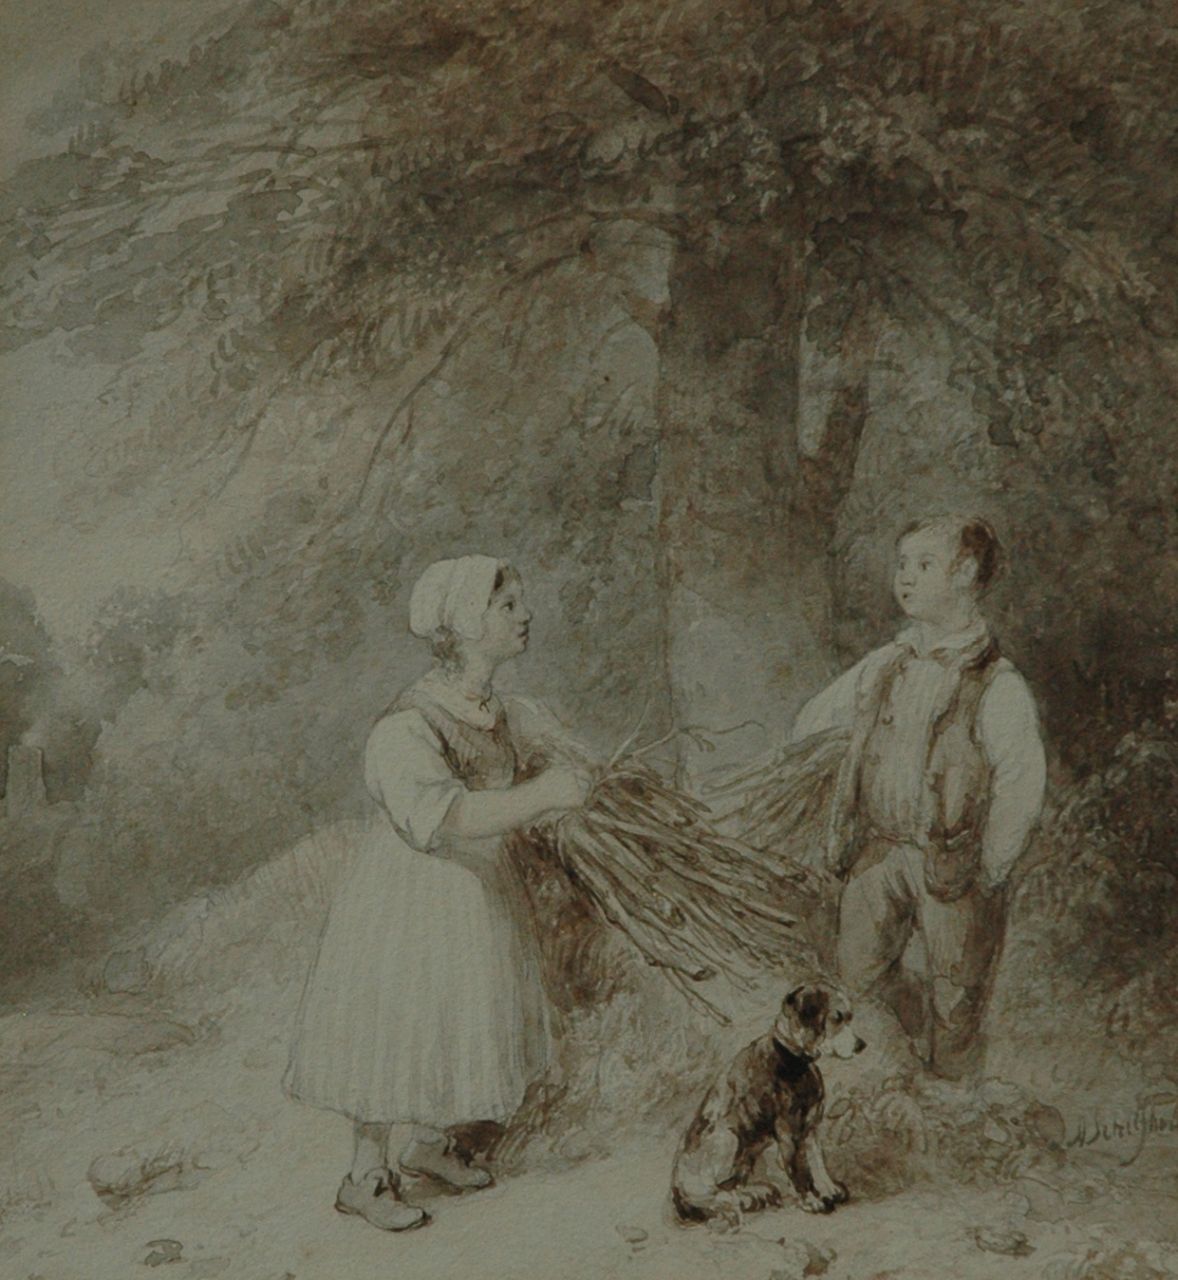 Schelfhout A.  | Andreas Schelfhout, Children collecting firewood, washed ink on paper 21.3 x 19.2 cm, signed l.r.